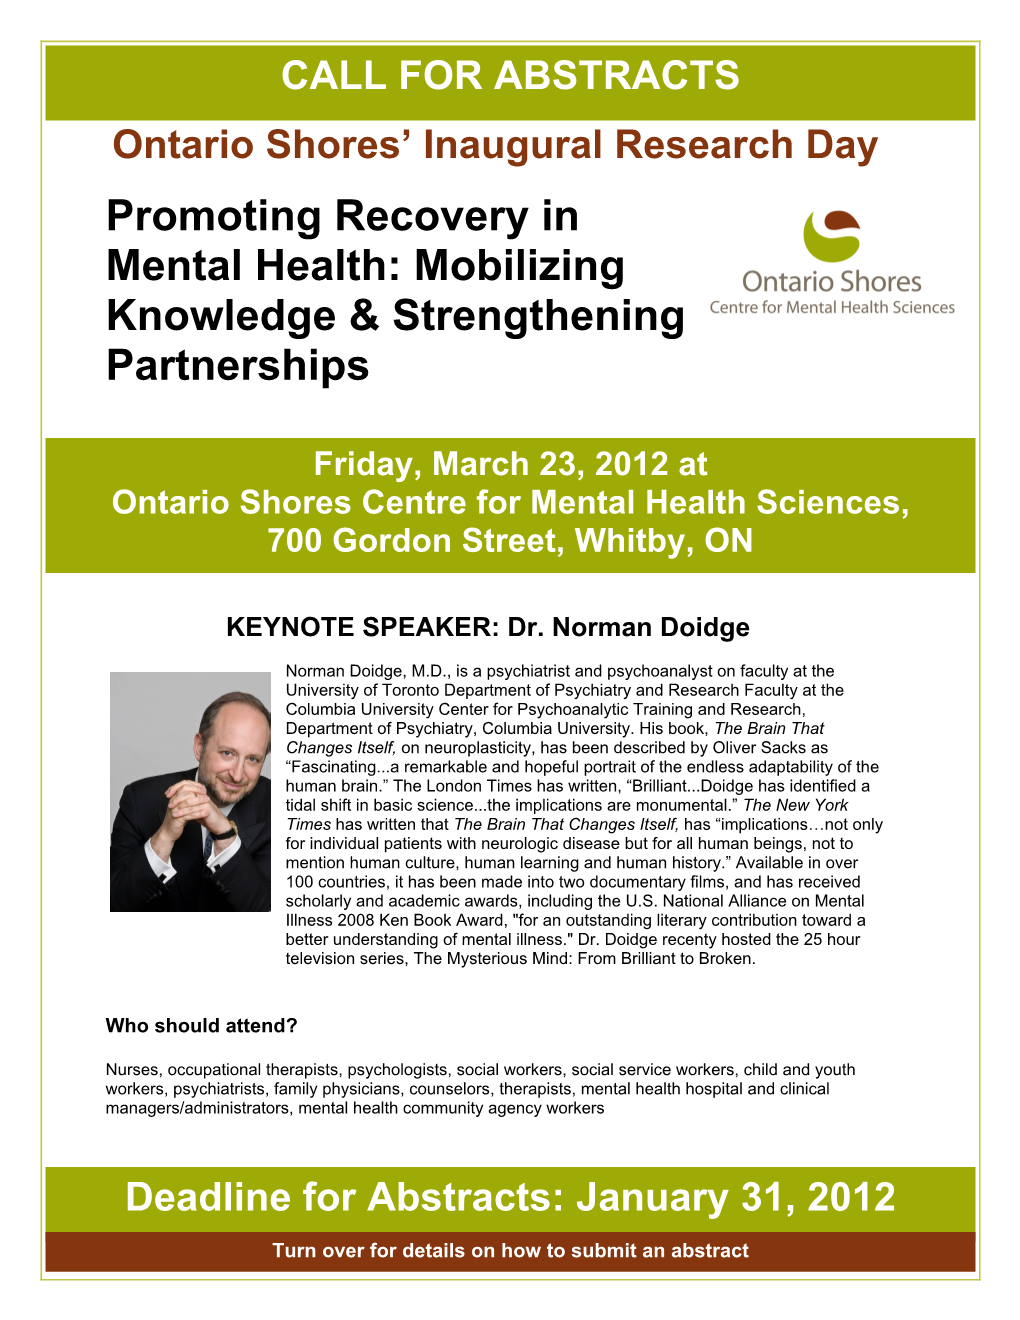 Promoting Recovery in Mental Health: Mobilizing Knowledge & Strengthening Partnerships